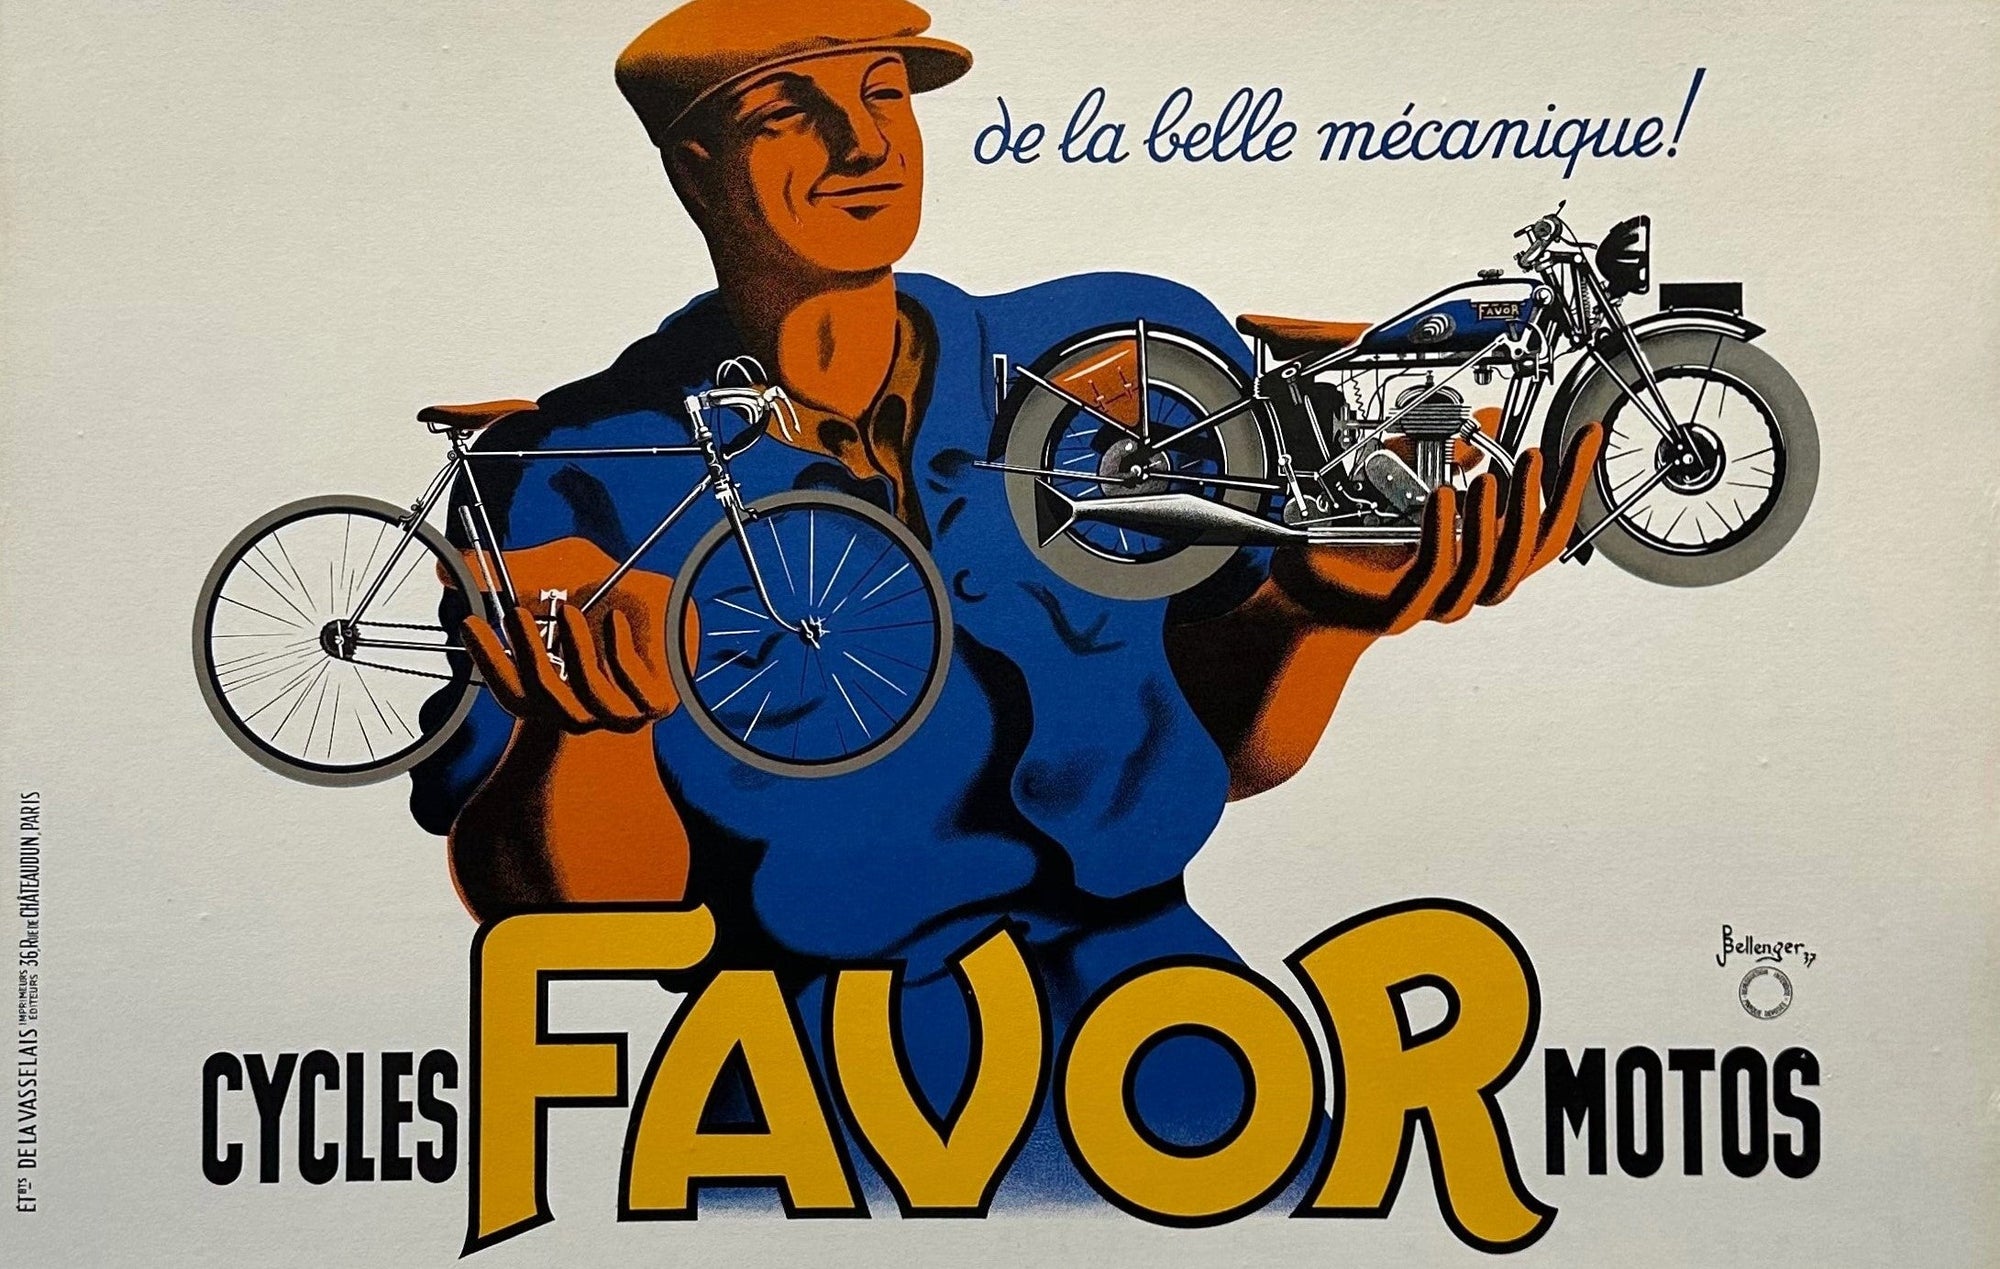 Cycles Favor Motos by Bellenger - Authentic Vintage Poster